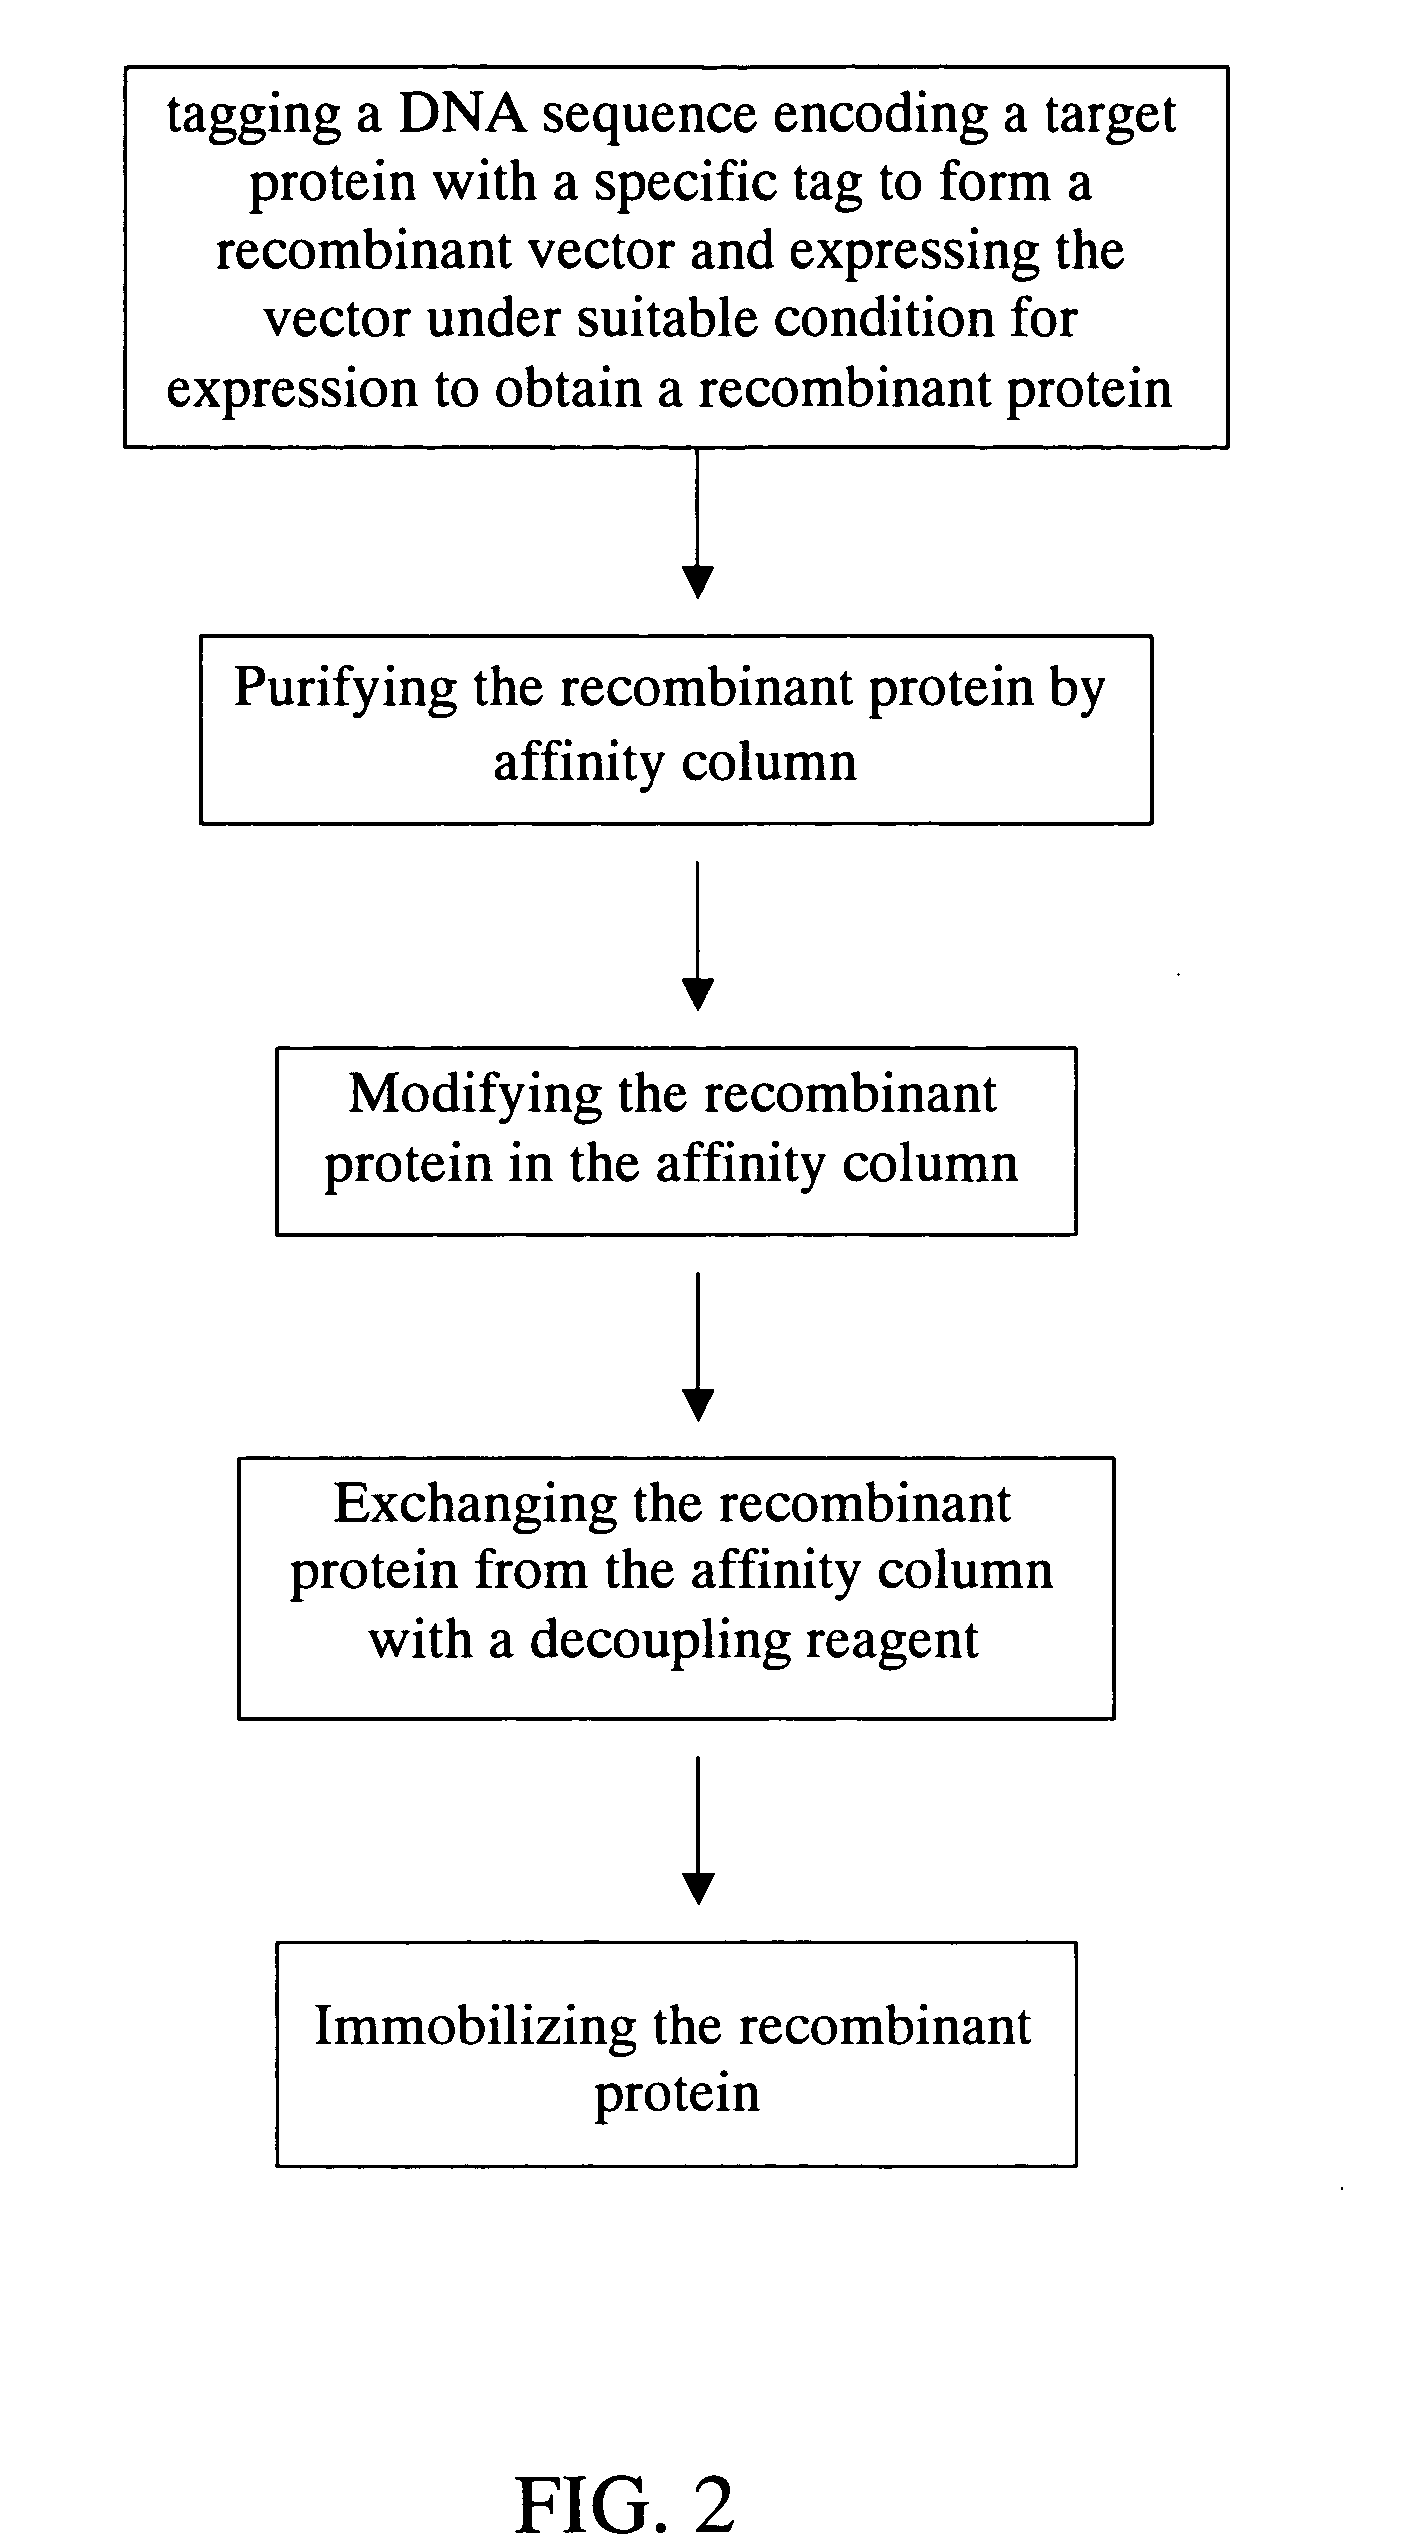 Method for purification, modification and immobilization of recombinant protein